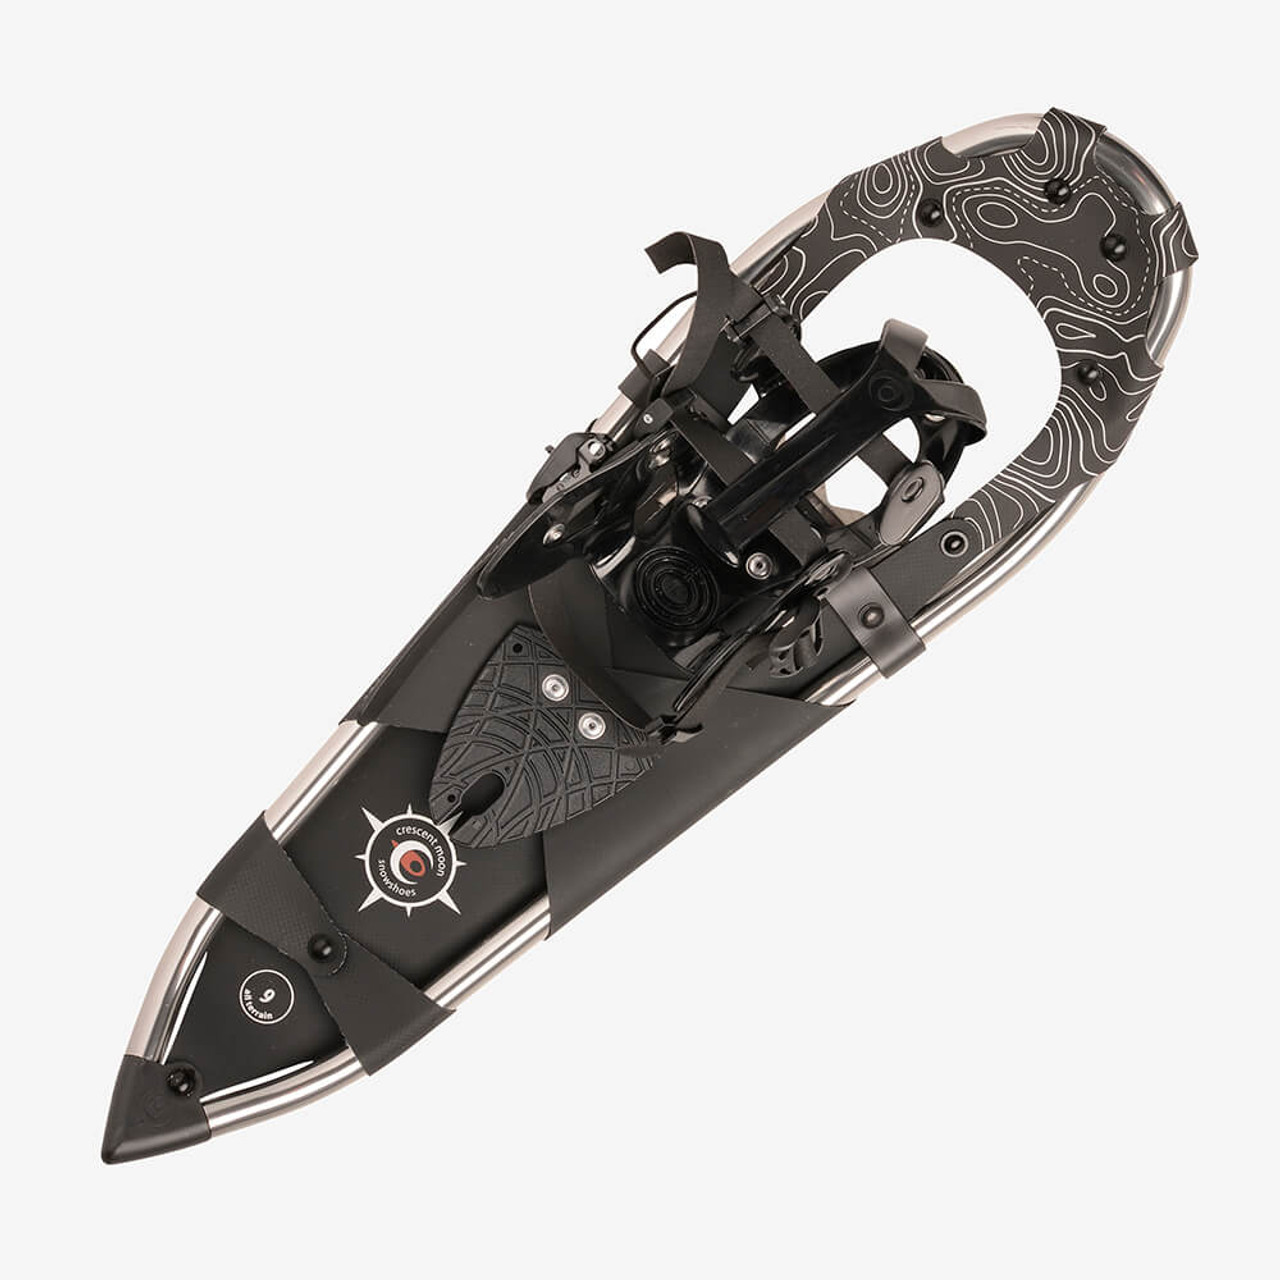 All-Terrain Snowshoes - Sawtooth 27 Silver